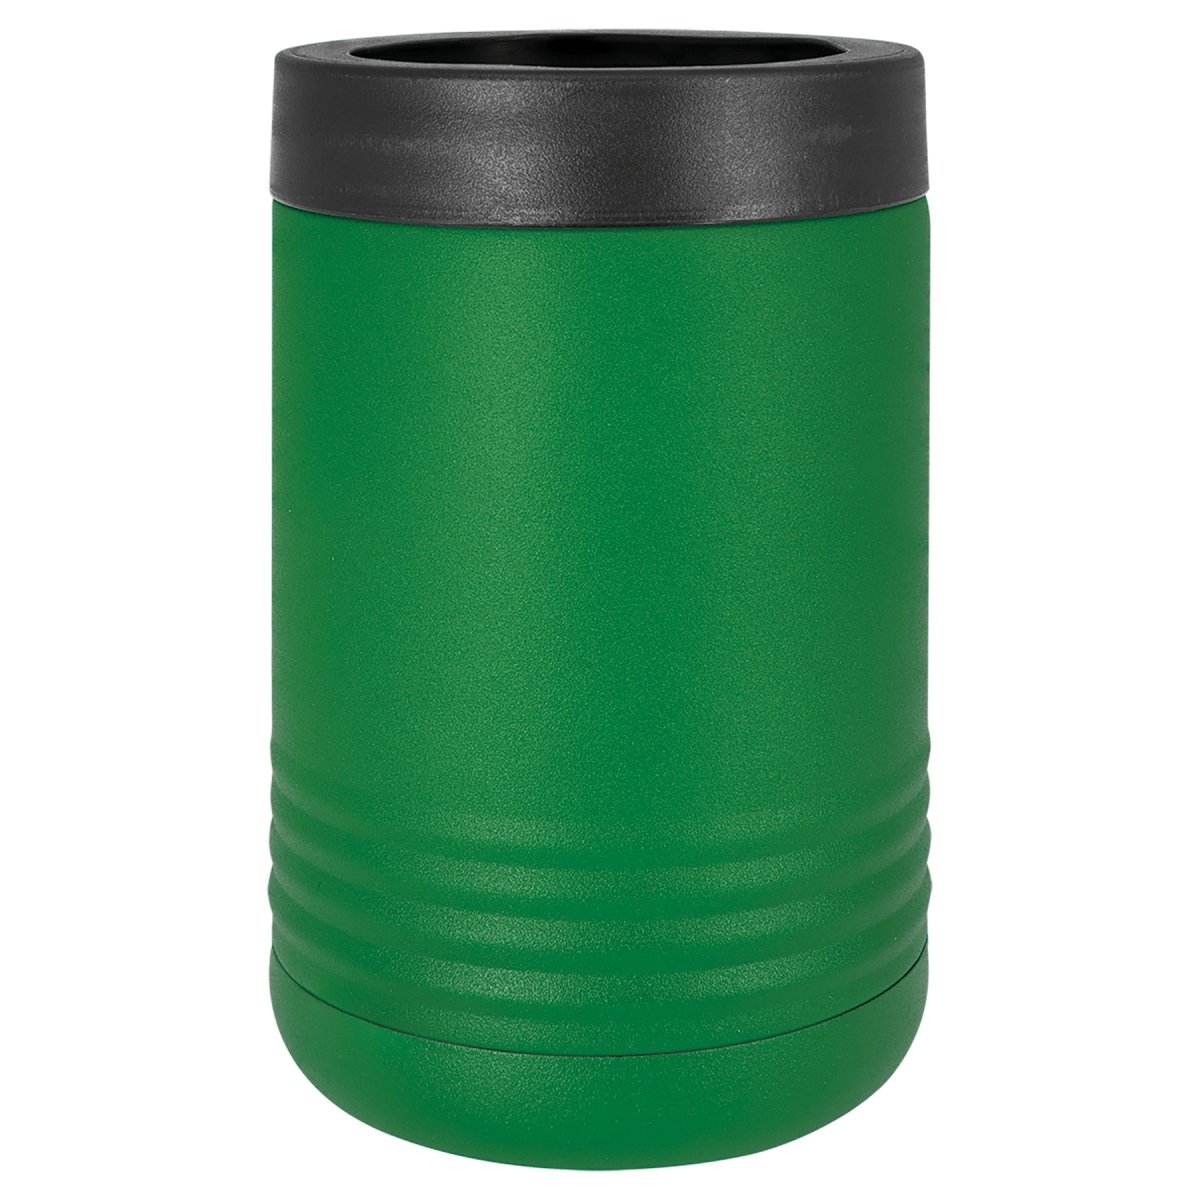 12 -16oz Stainless Steel & Powder Coated Vacuum Insulated Beverage Holder - The Luua Company